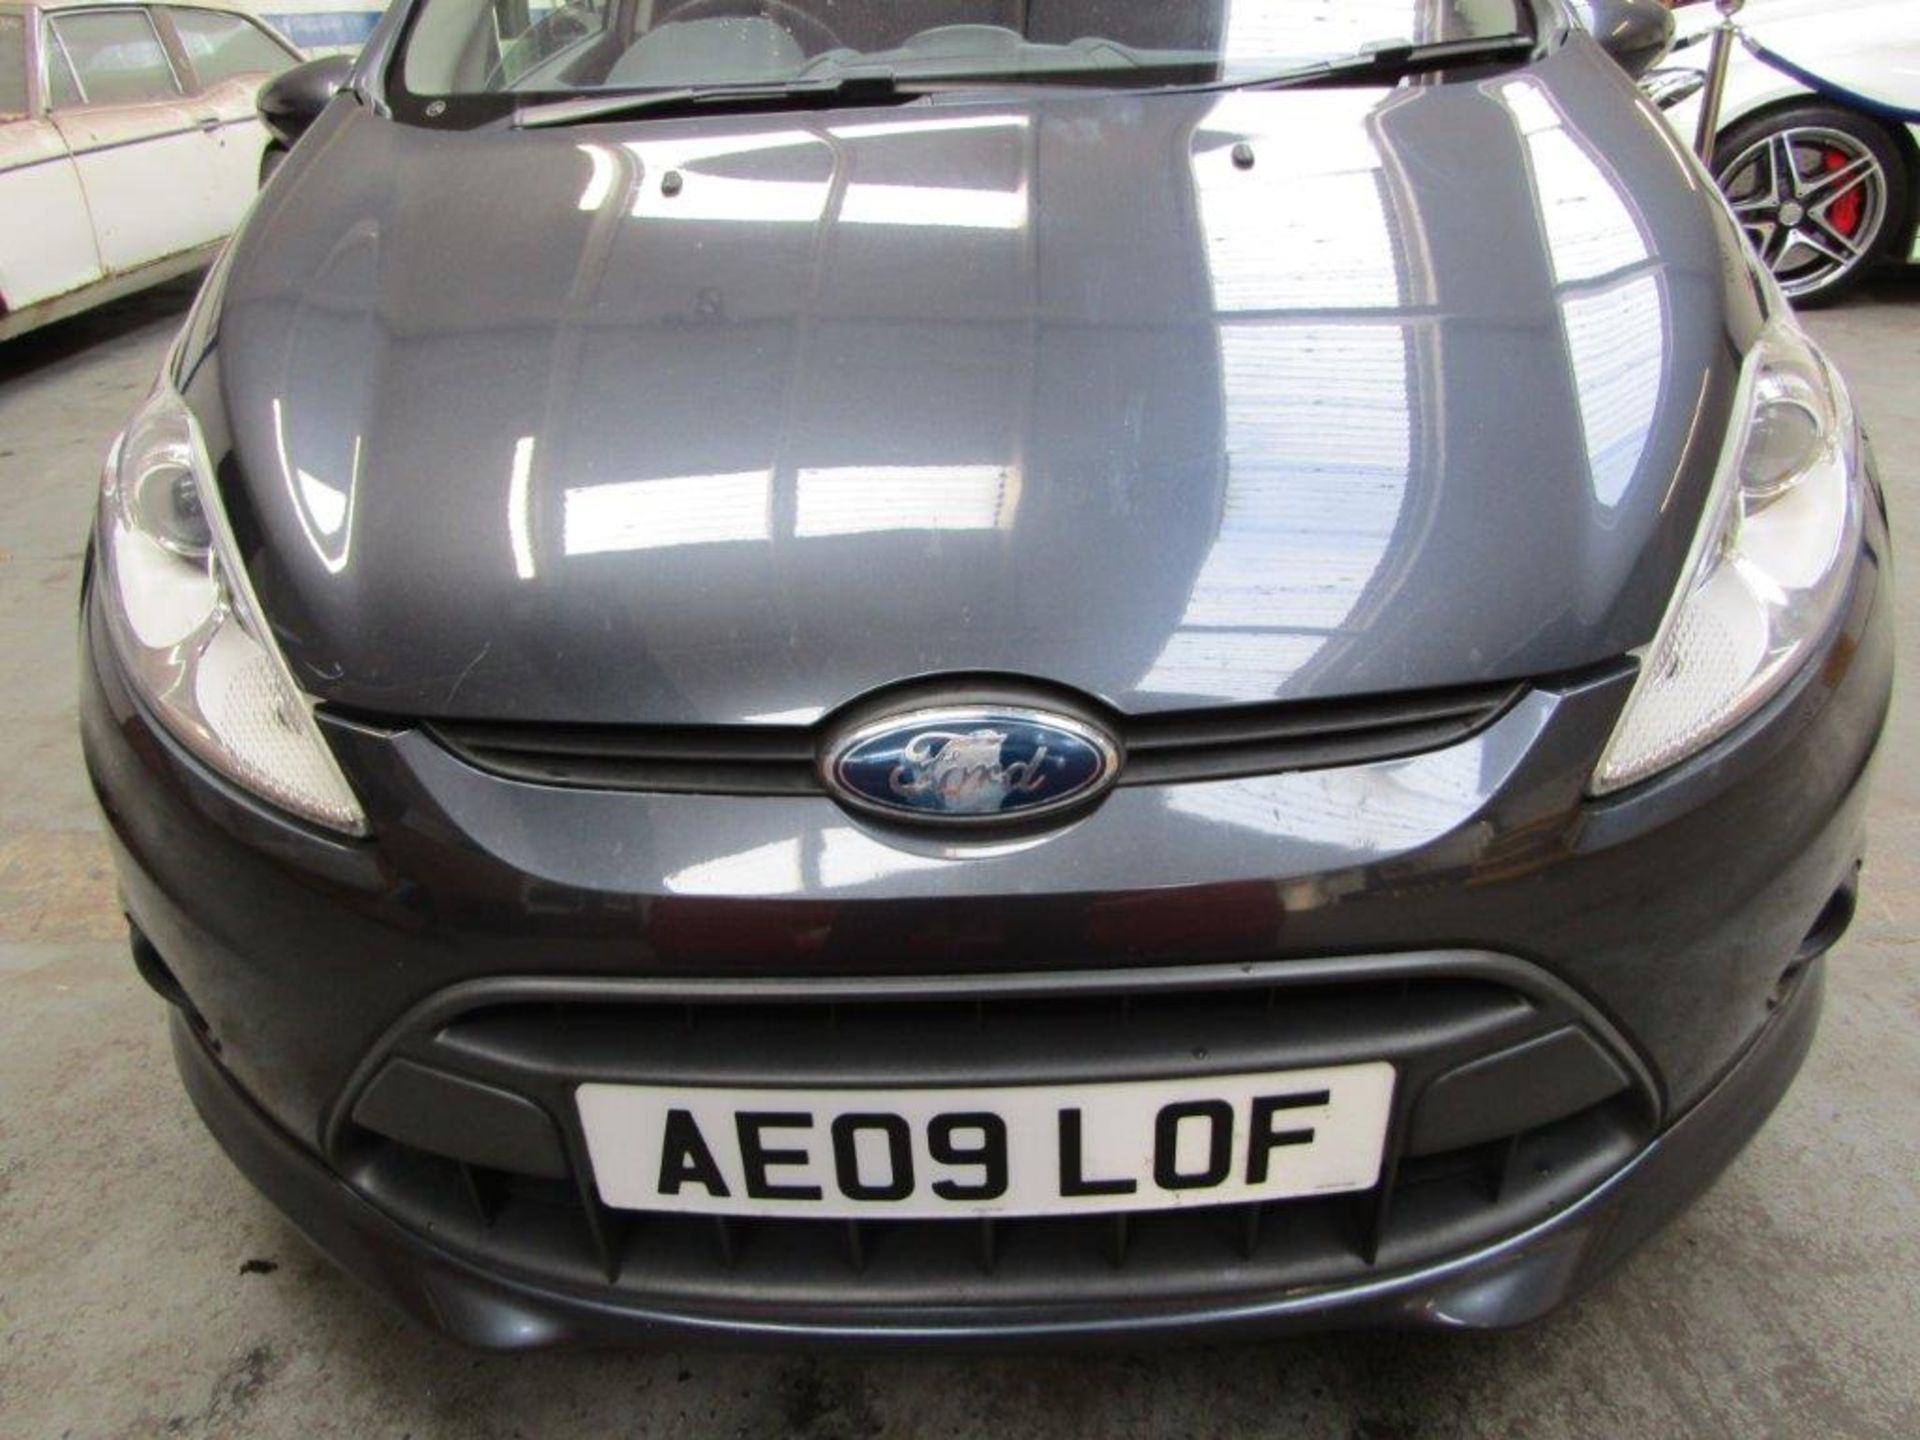 09 09 Ford Fiesta - Image 11 of 21